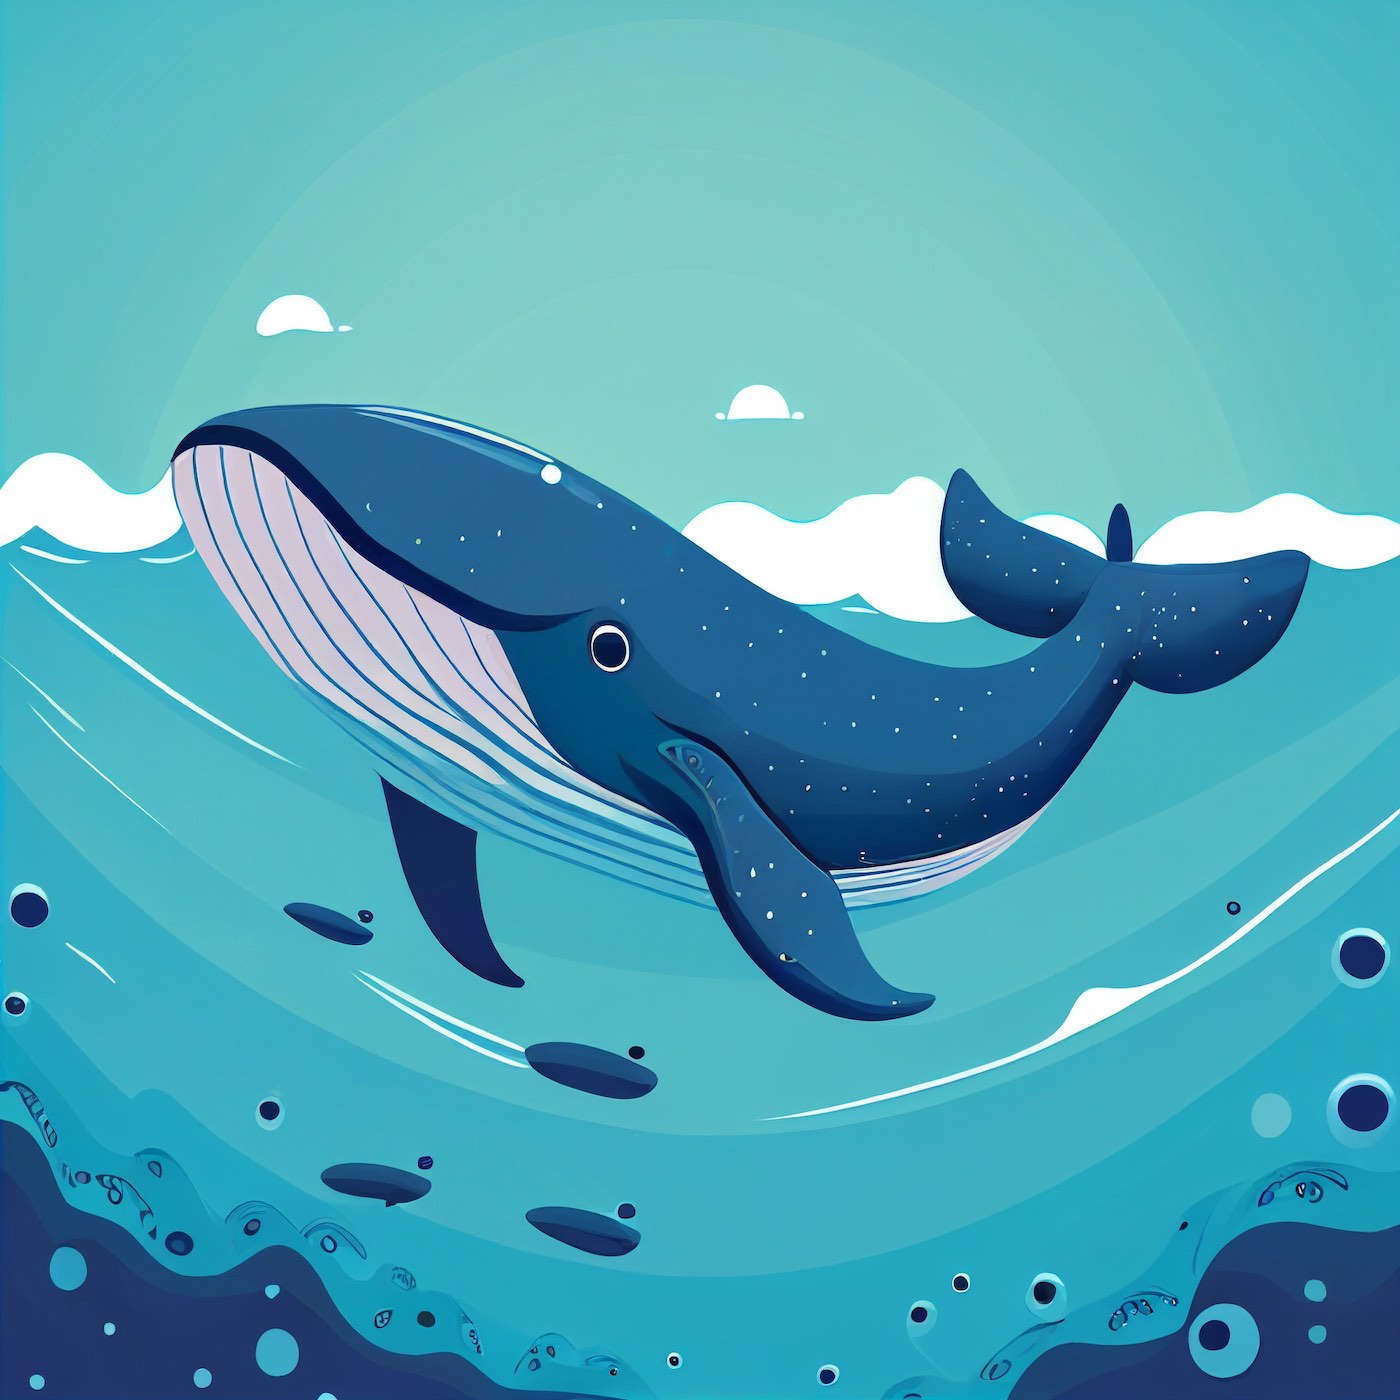 Illustration of a whale looking at the sign in form